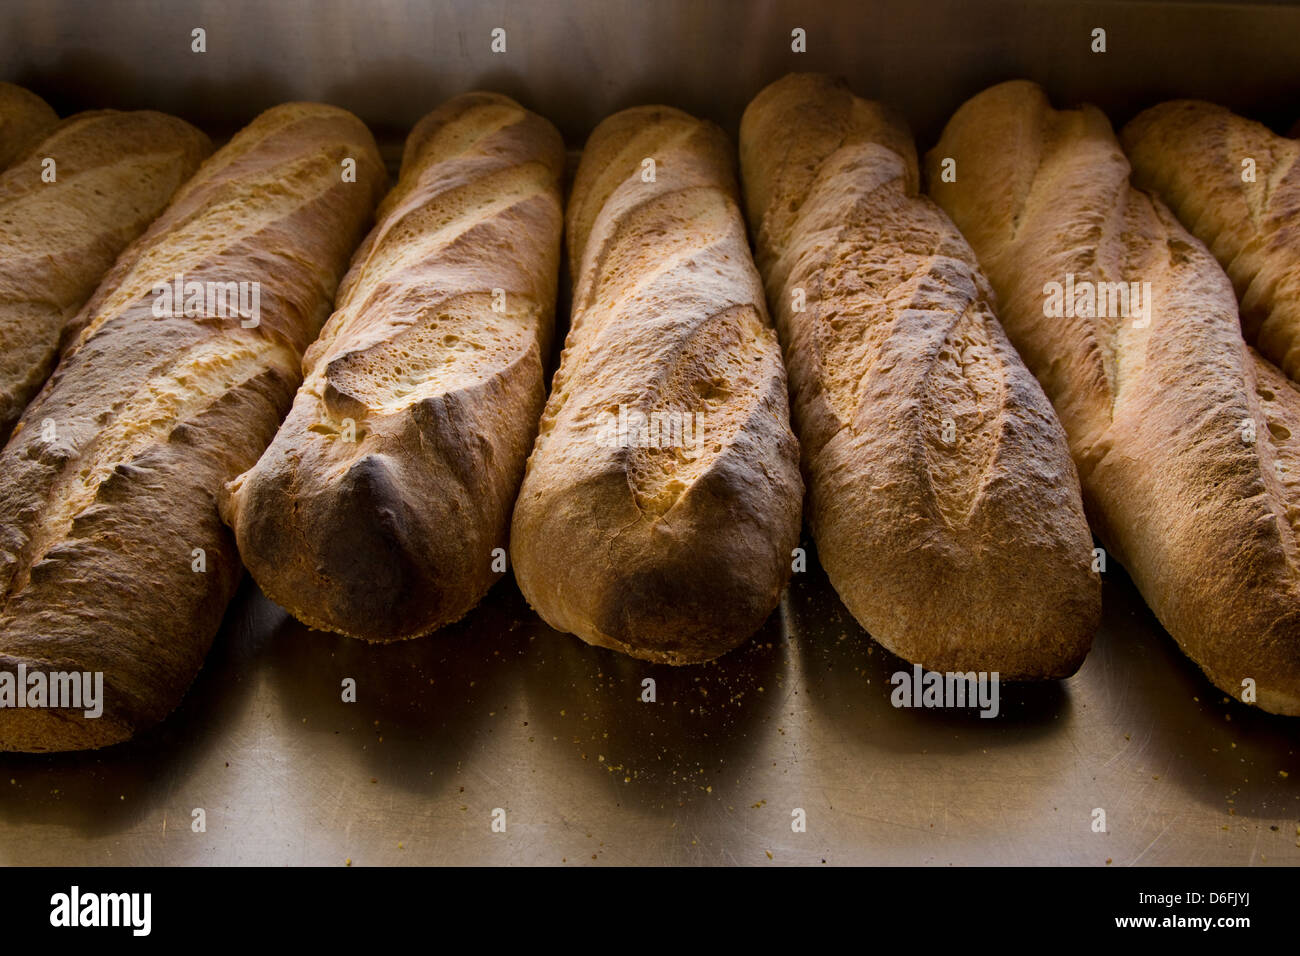 Freshly baked bread for sale in a commercial bakery Stock Photo